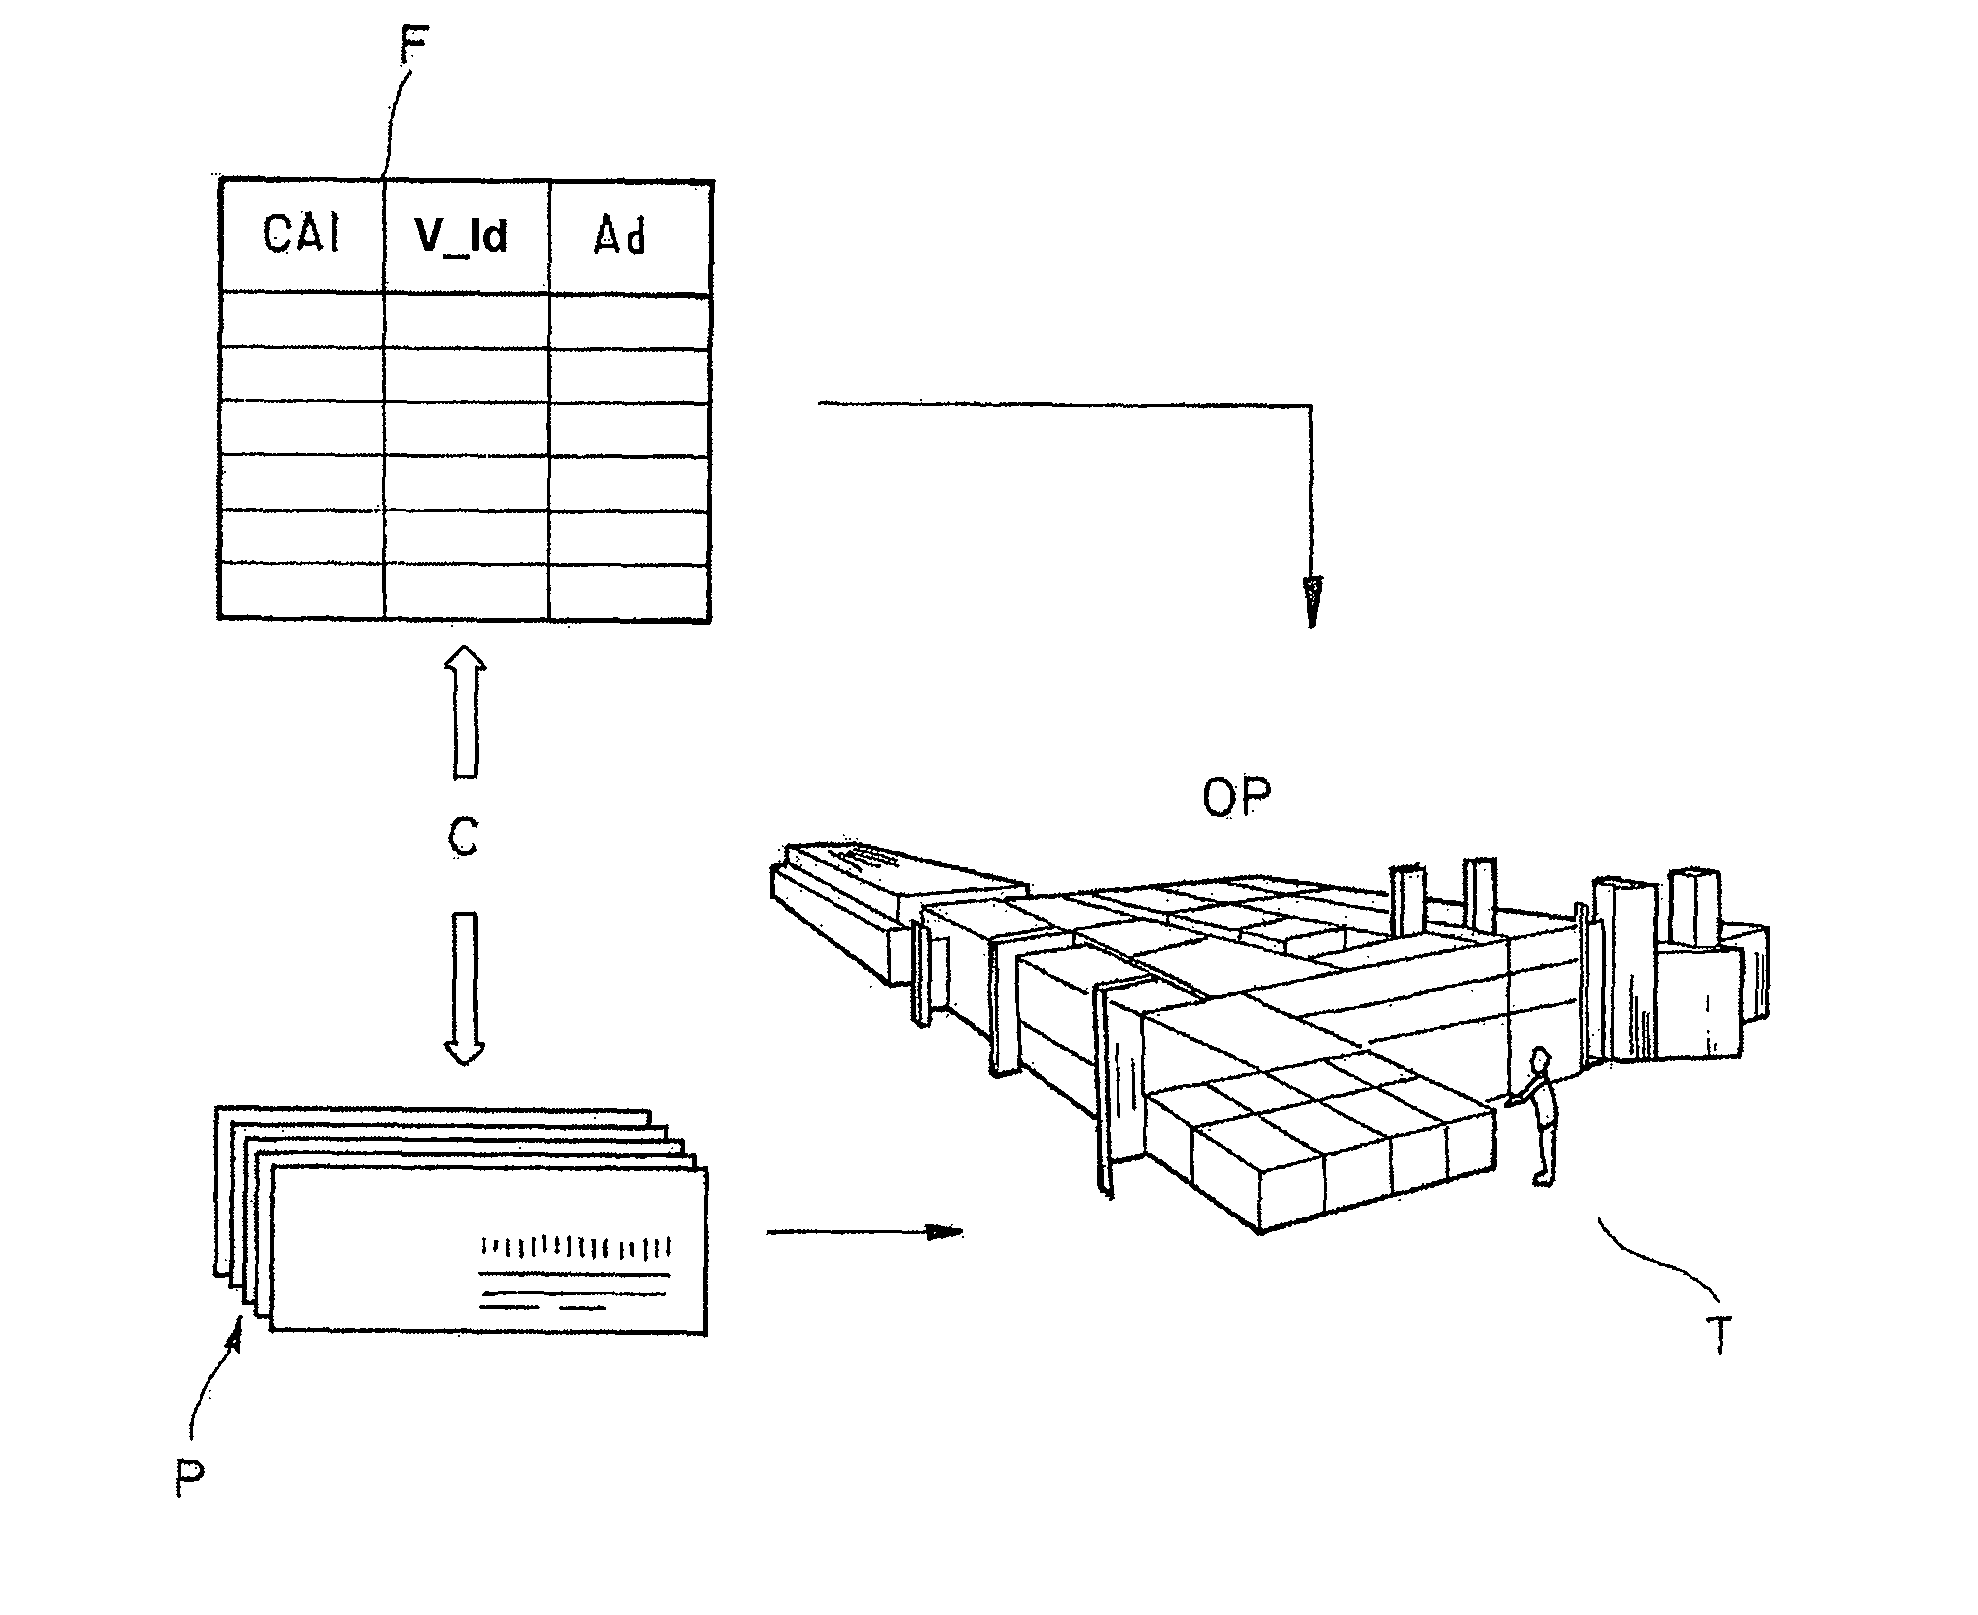 Method of processing mailpieces using customer codes associated with digital fingerprints